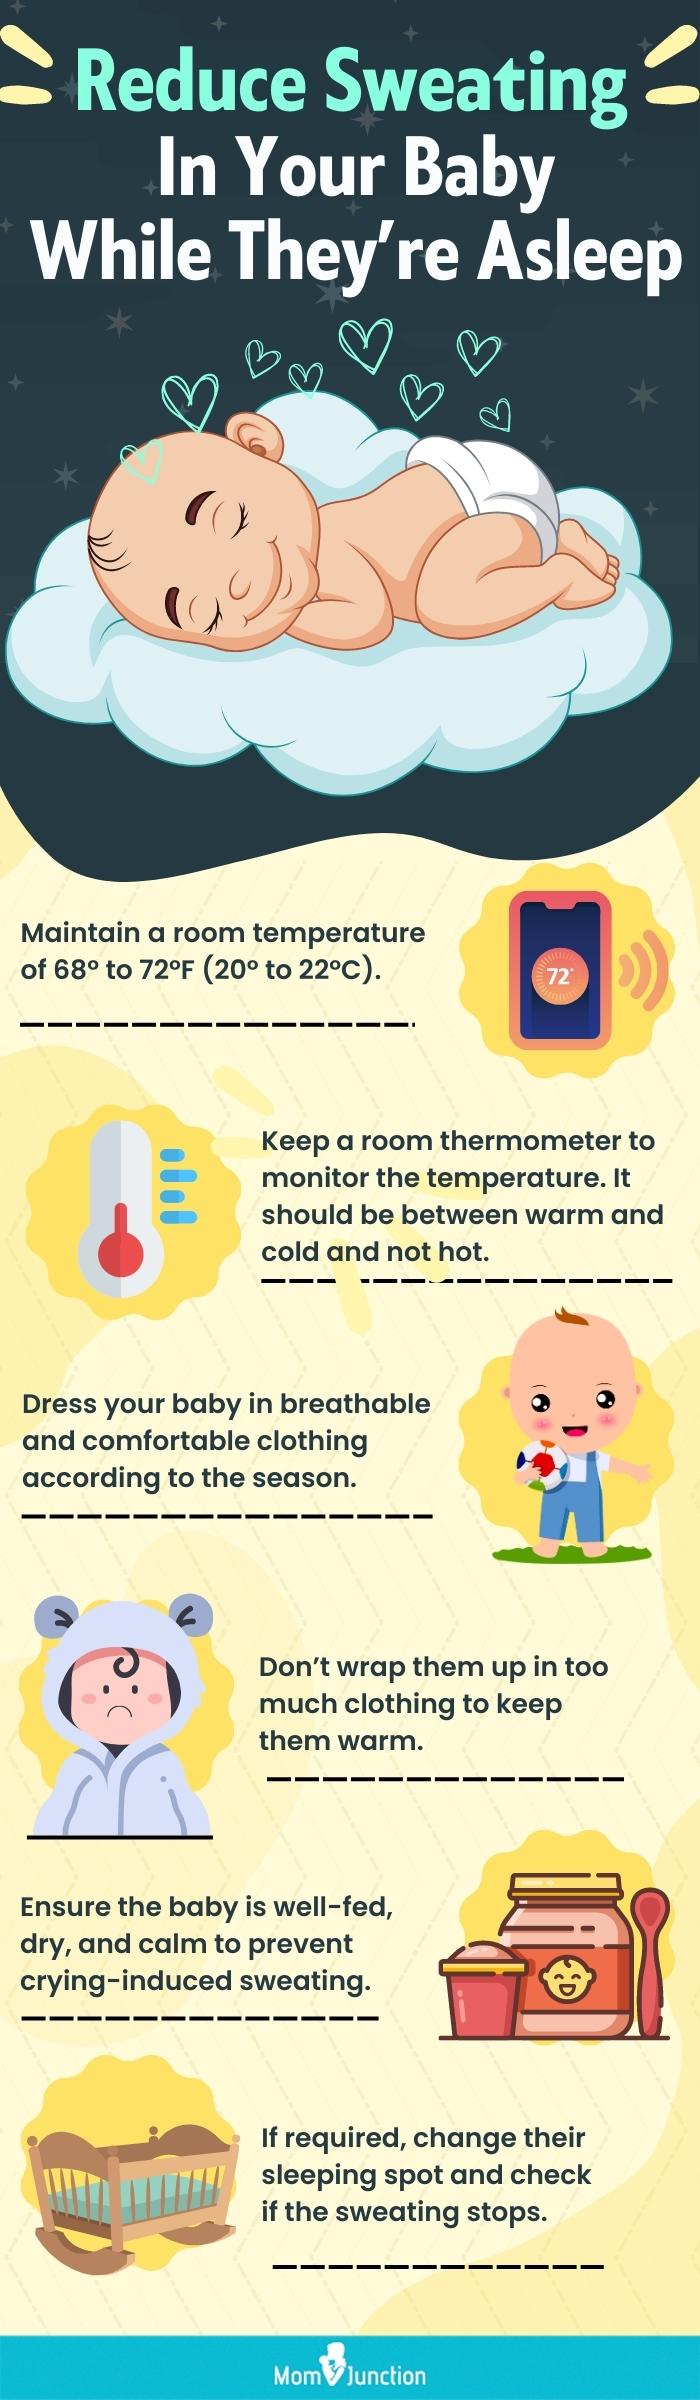 reduce sweating in your baby while they’re asleep (infographic)